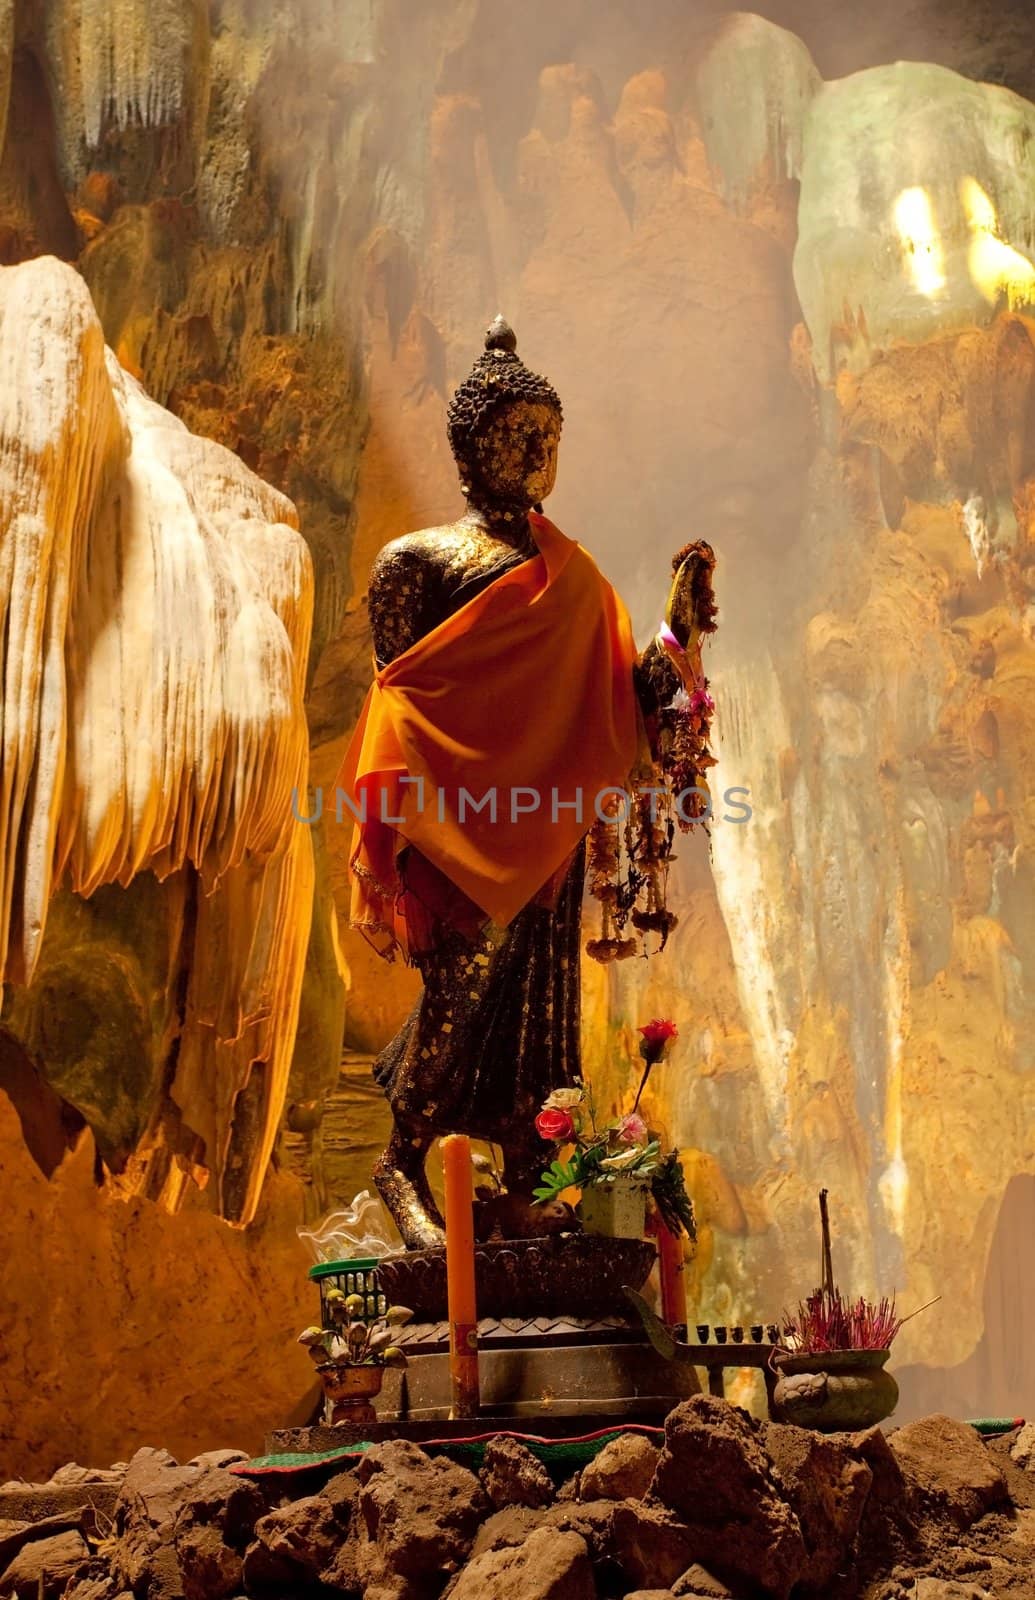 Image buddha in cave, Thailand